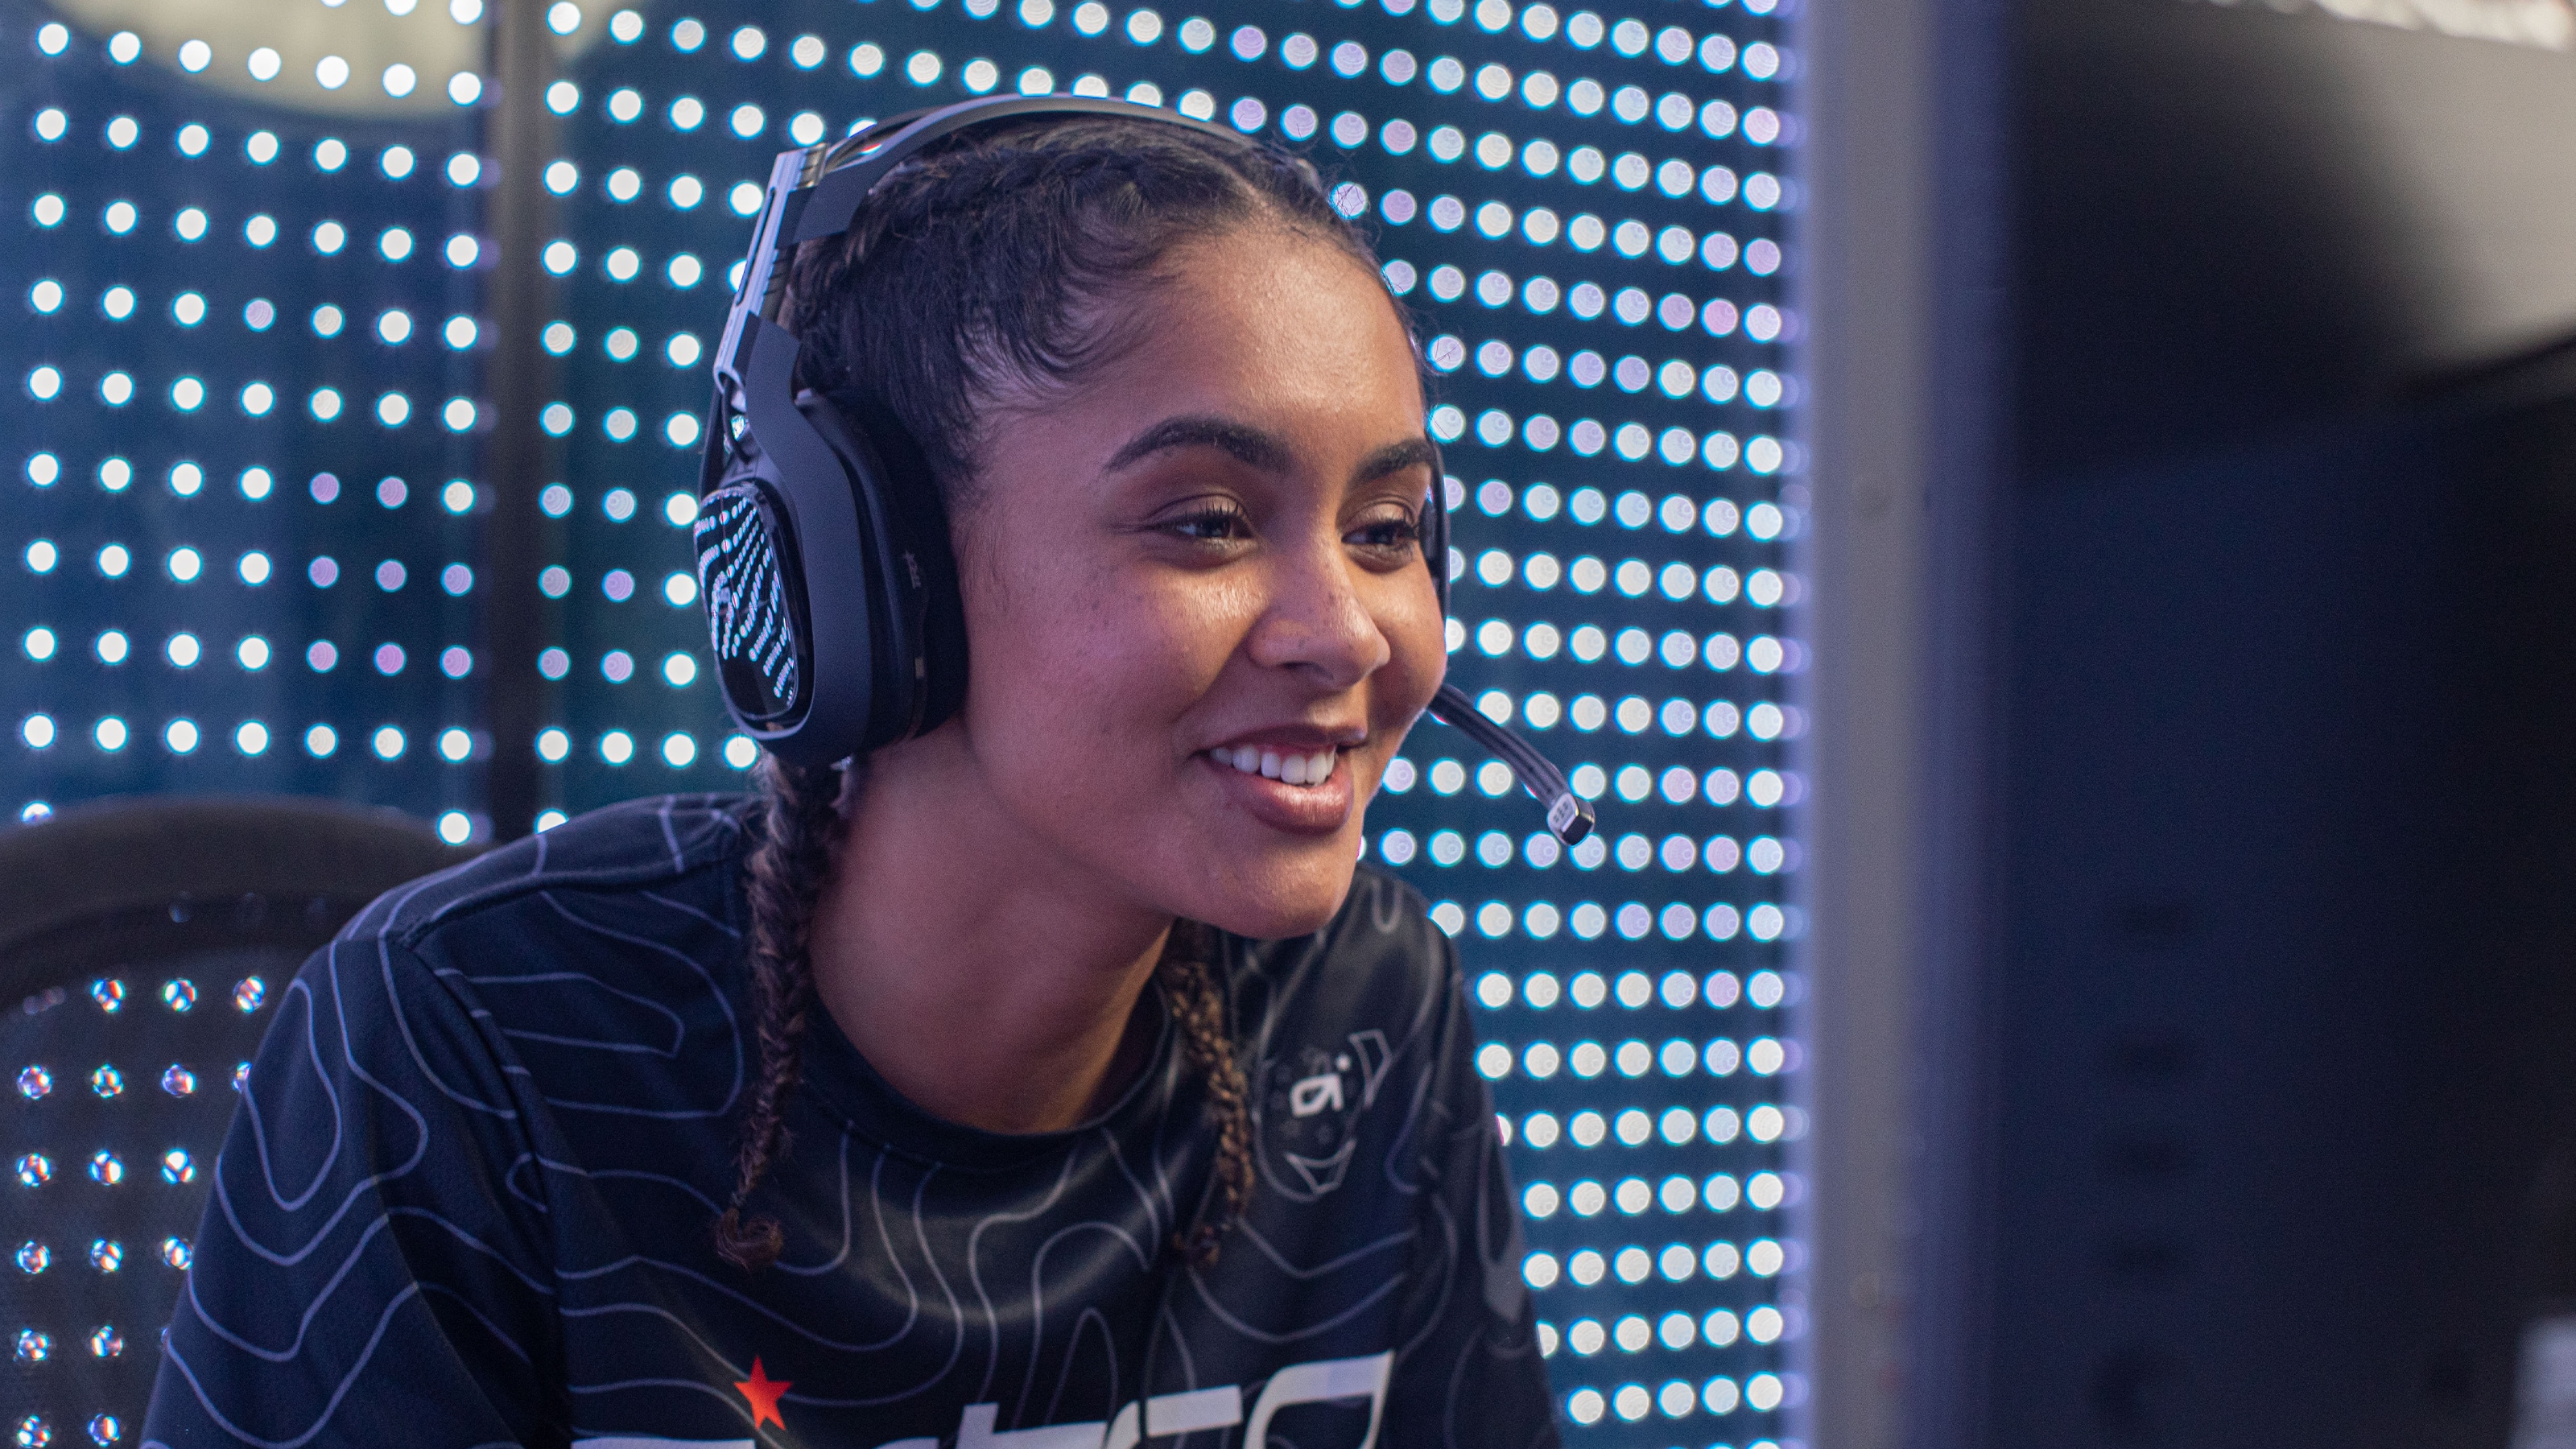 Girl with Astro gaming headset